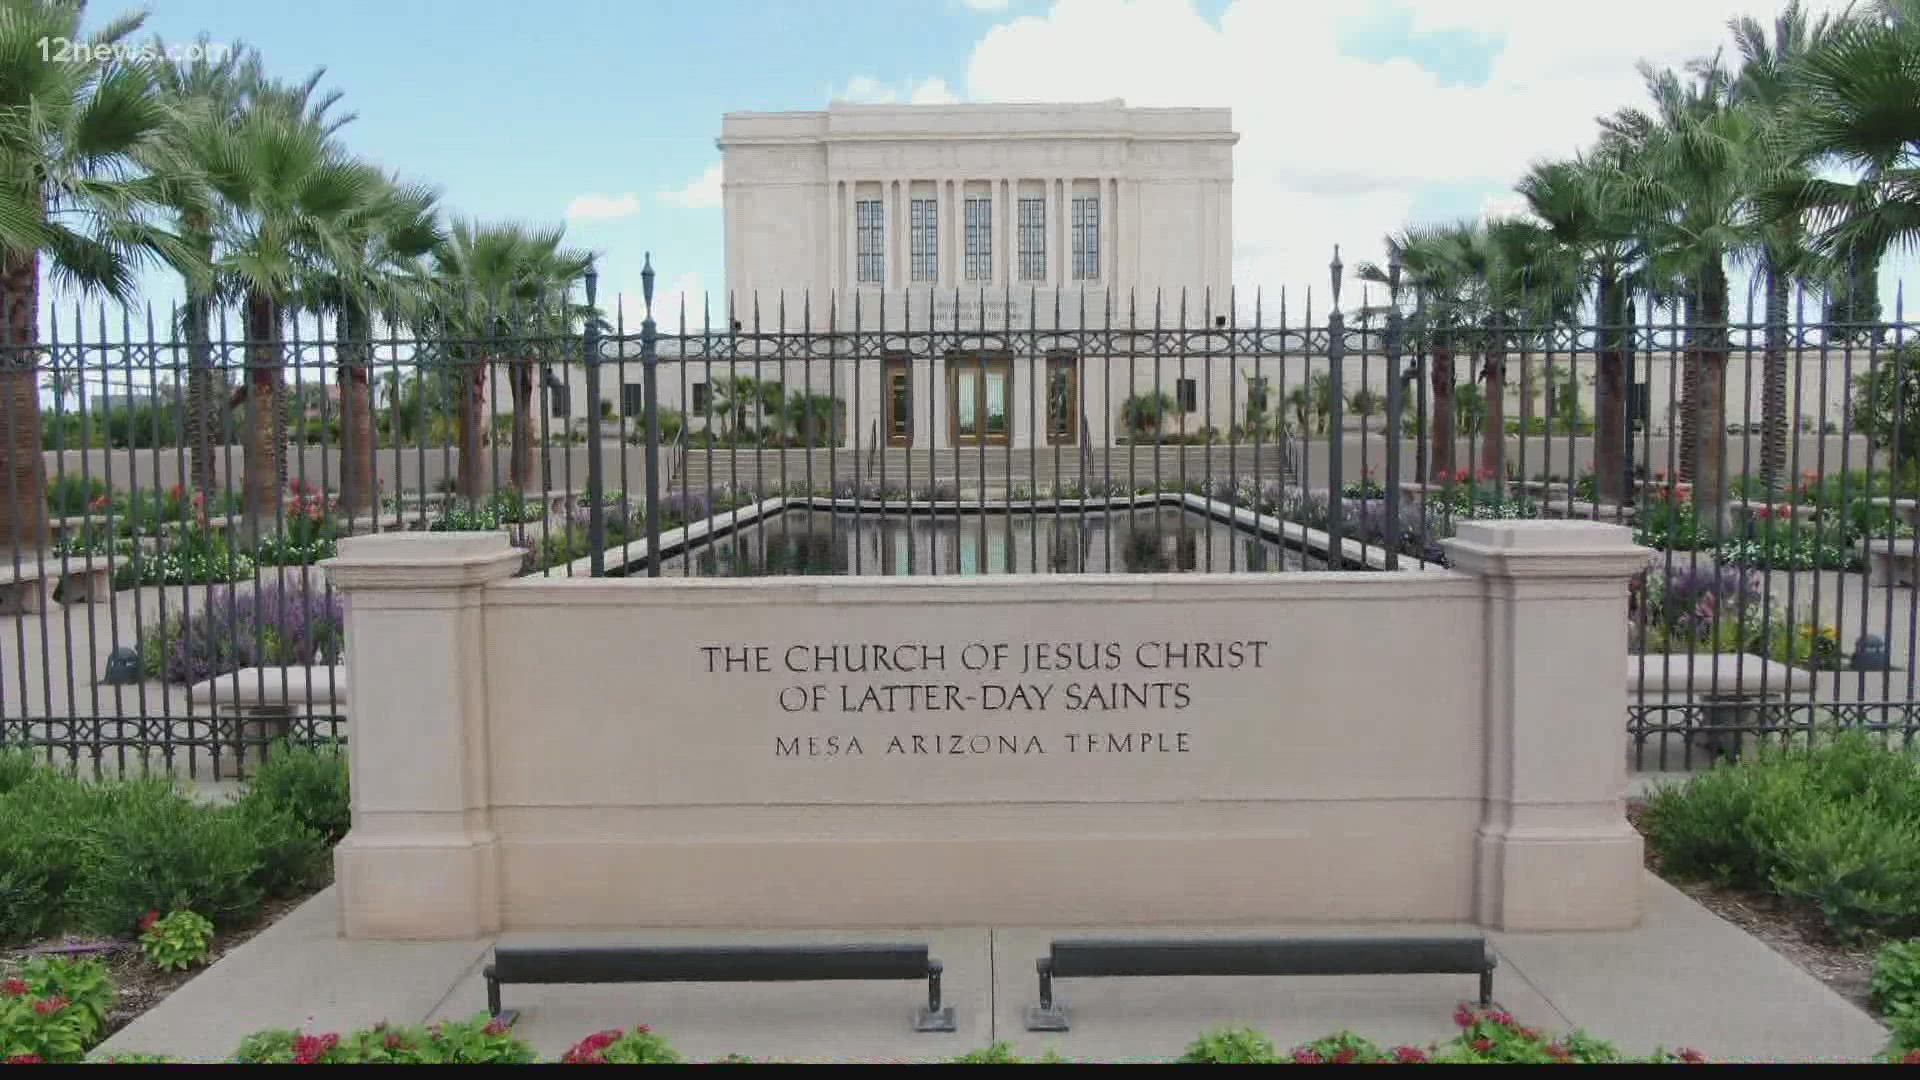 After 3.5 years of being closed for renovations, the Mesa Arizona Temple is ready to re-open to the community it has served for 94 years.